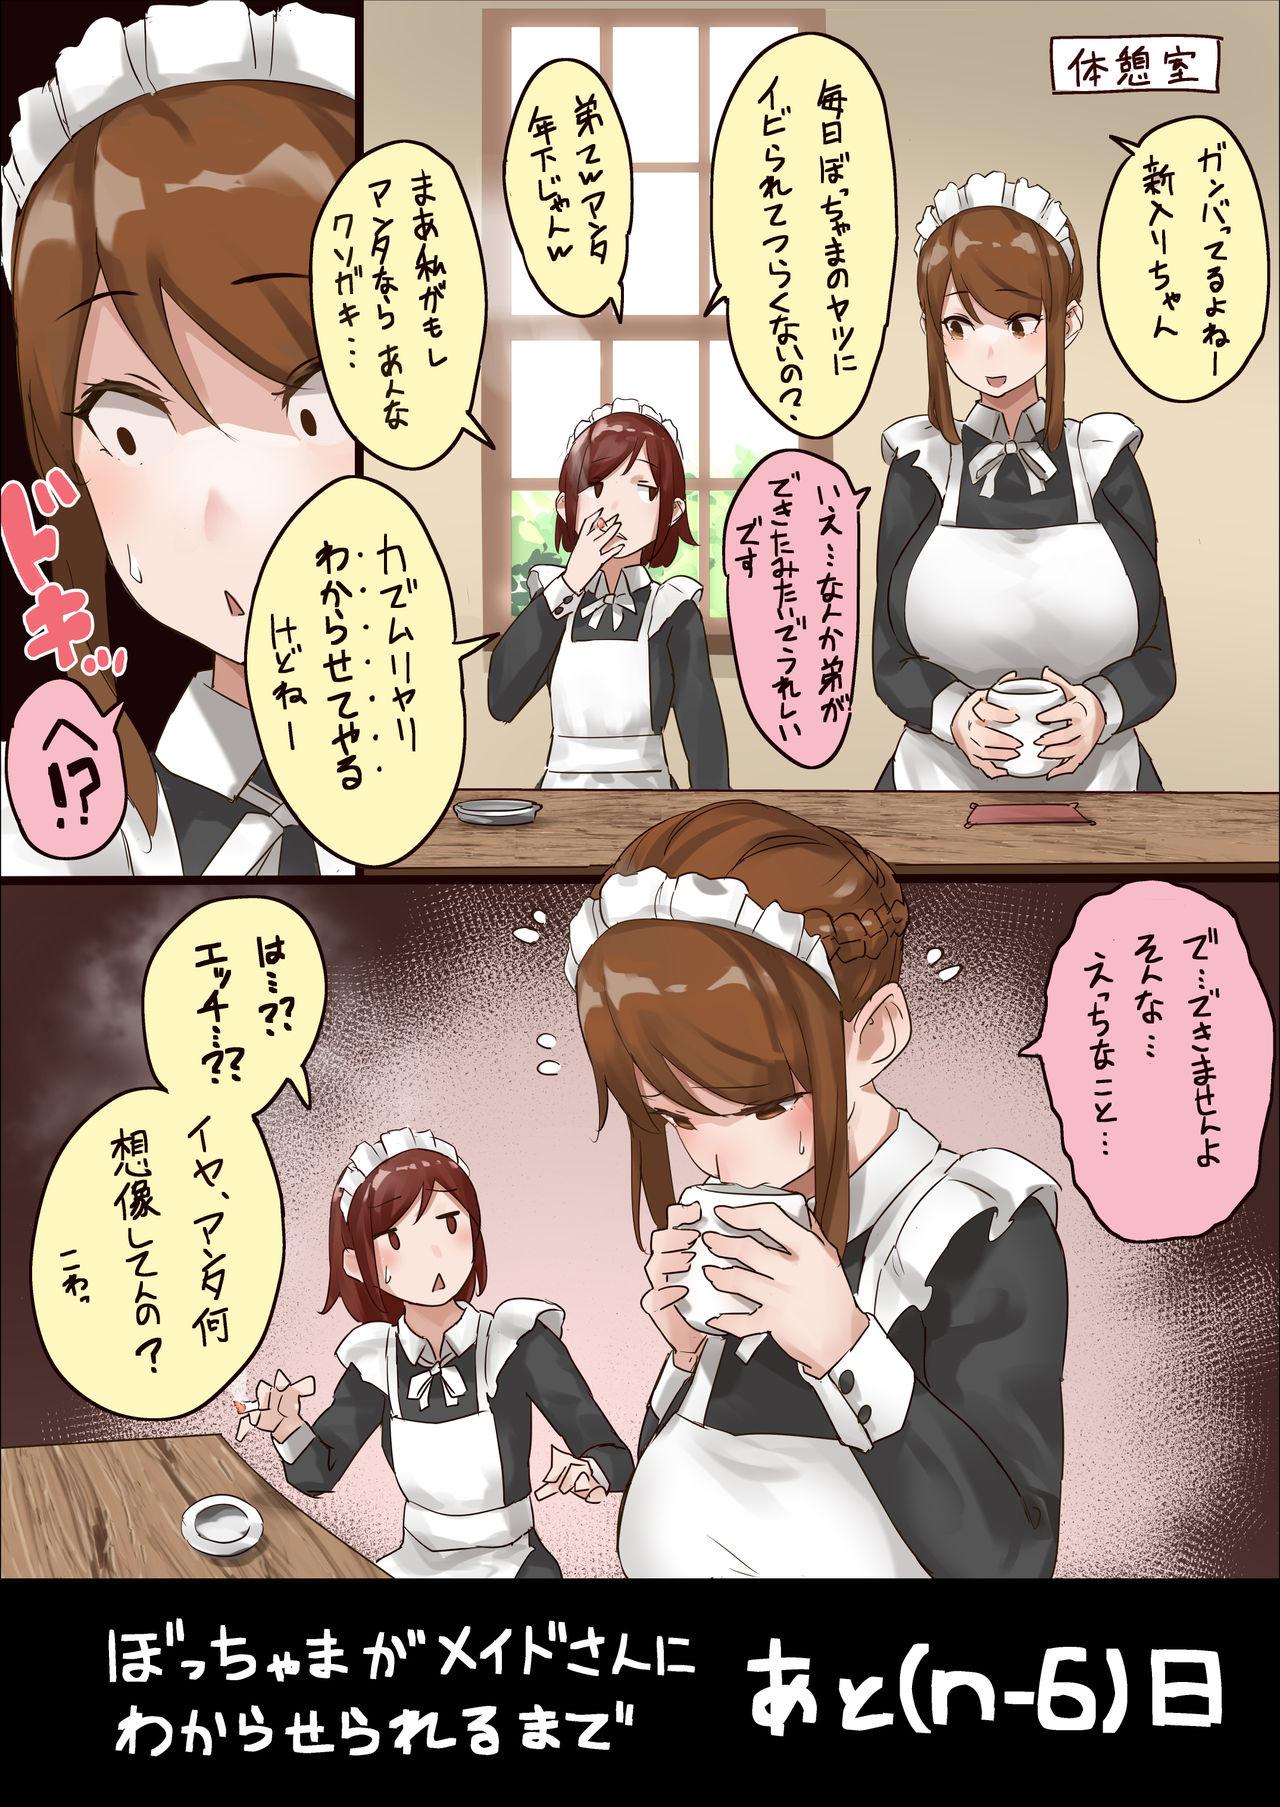 Vergon master and maid - Original Oldyoung - Page 7